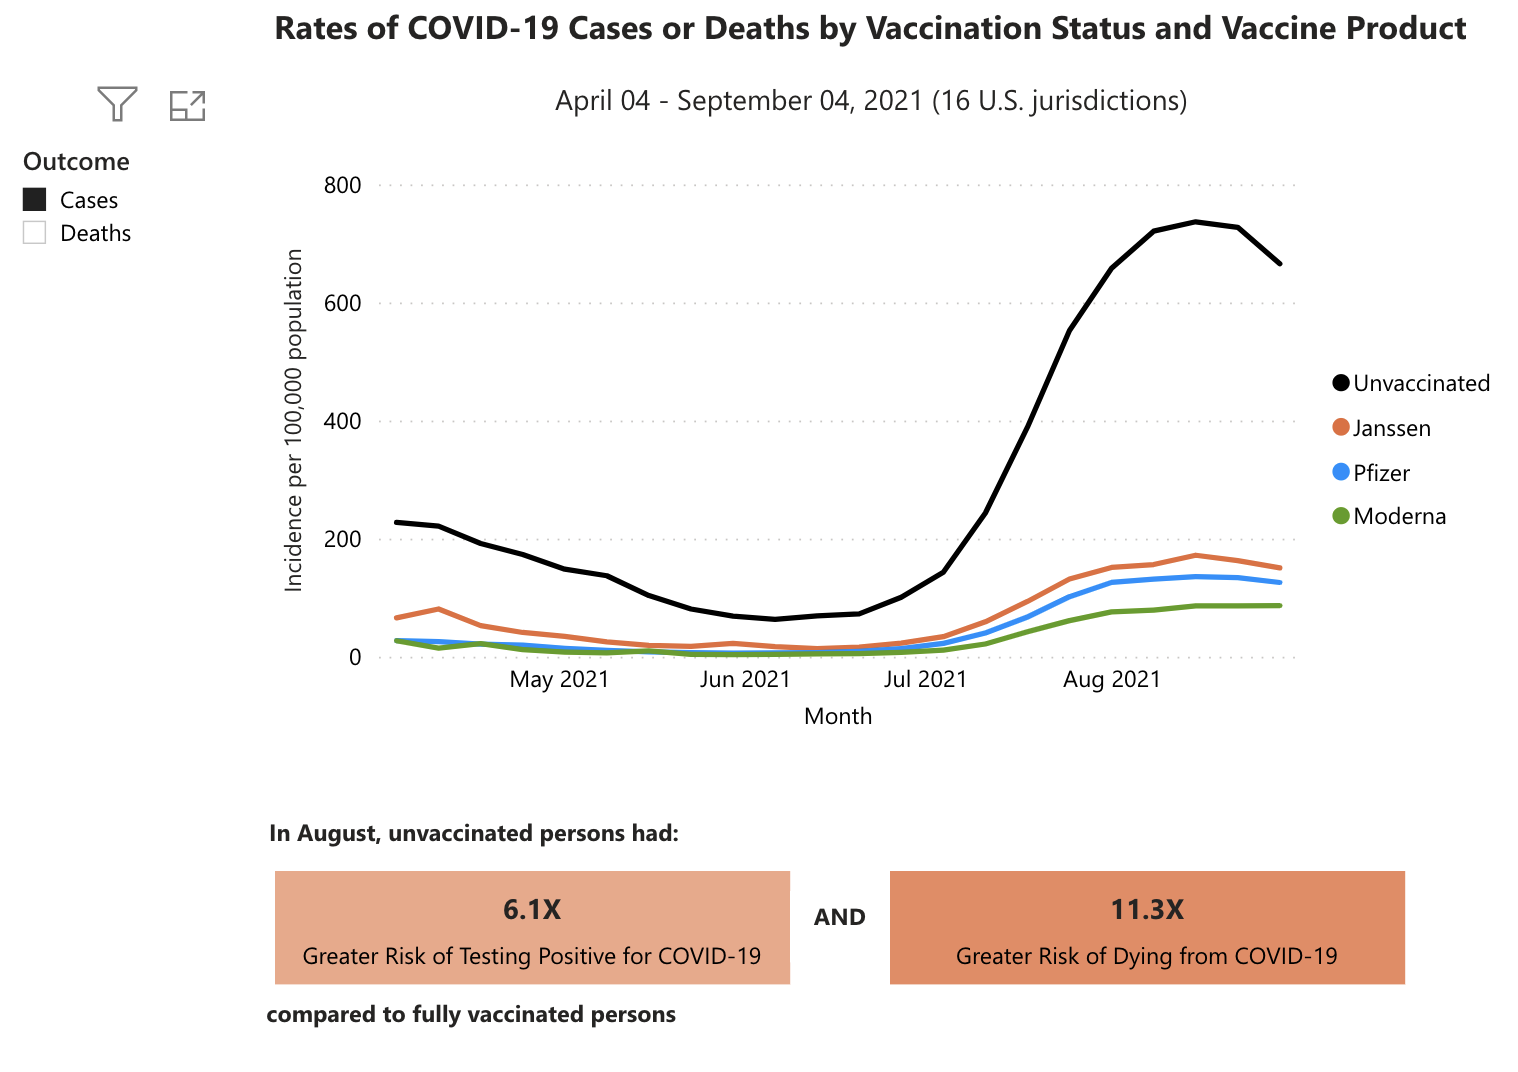 rates of covid 19 cases chart, showing far higher rates for unvaccinated, but among vaccinated: j&j highest and moderna lowest